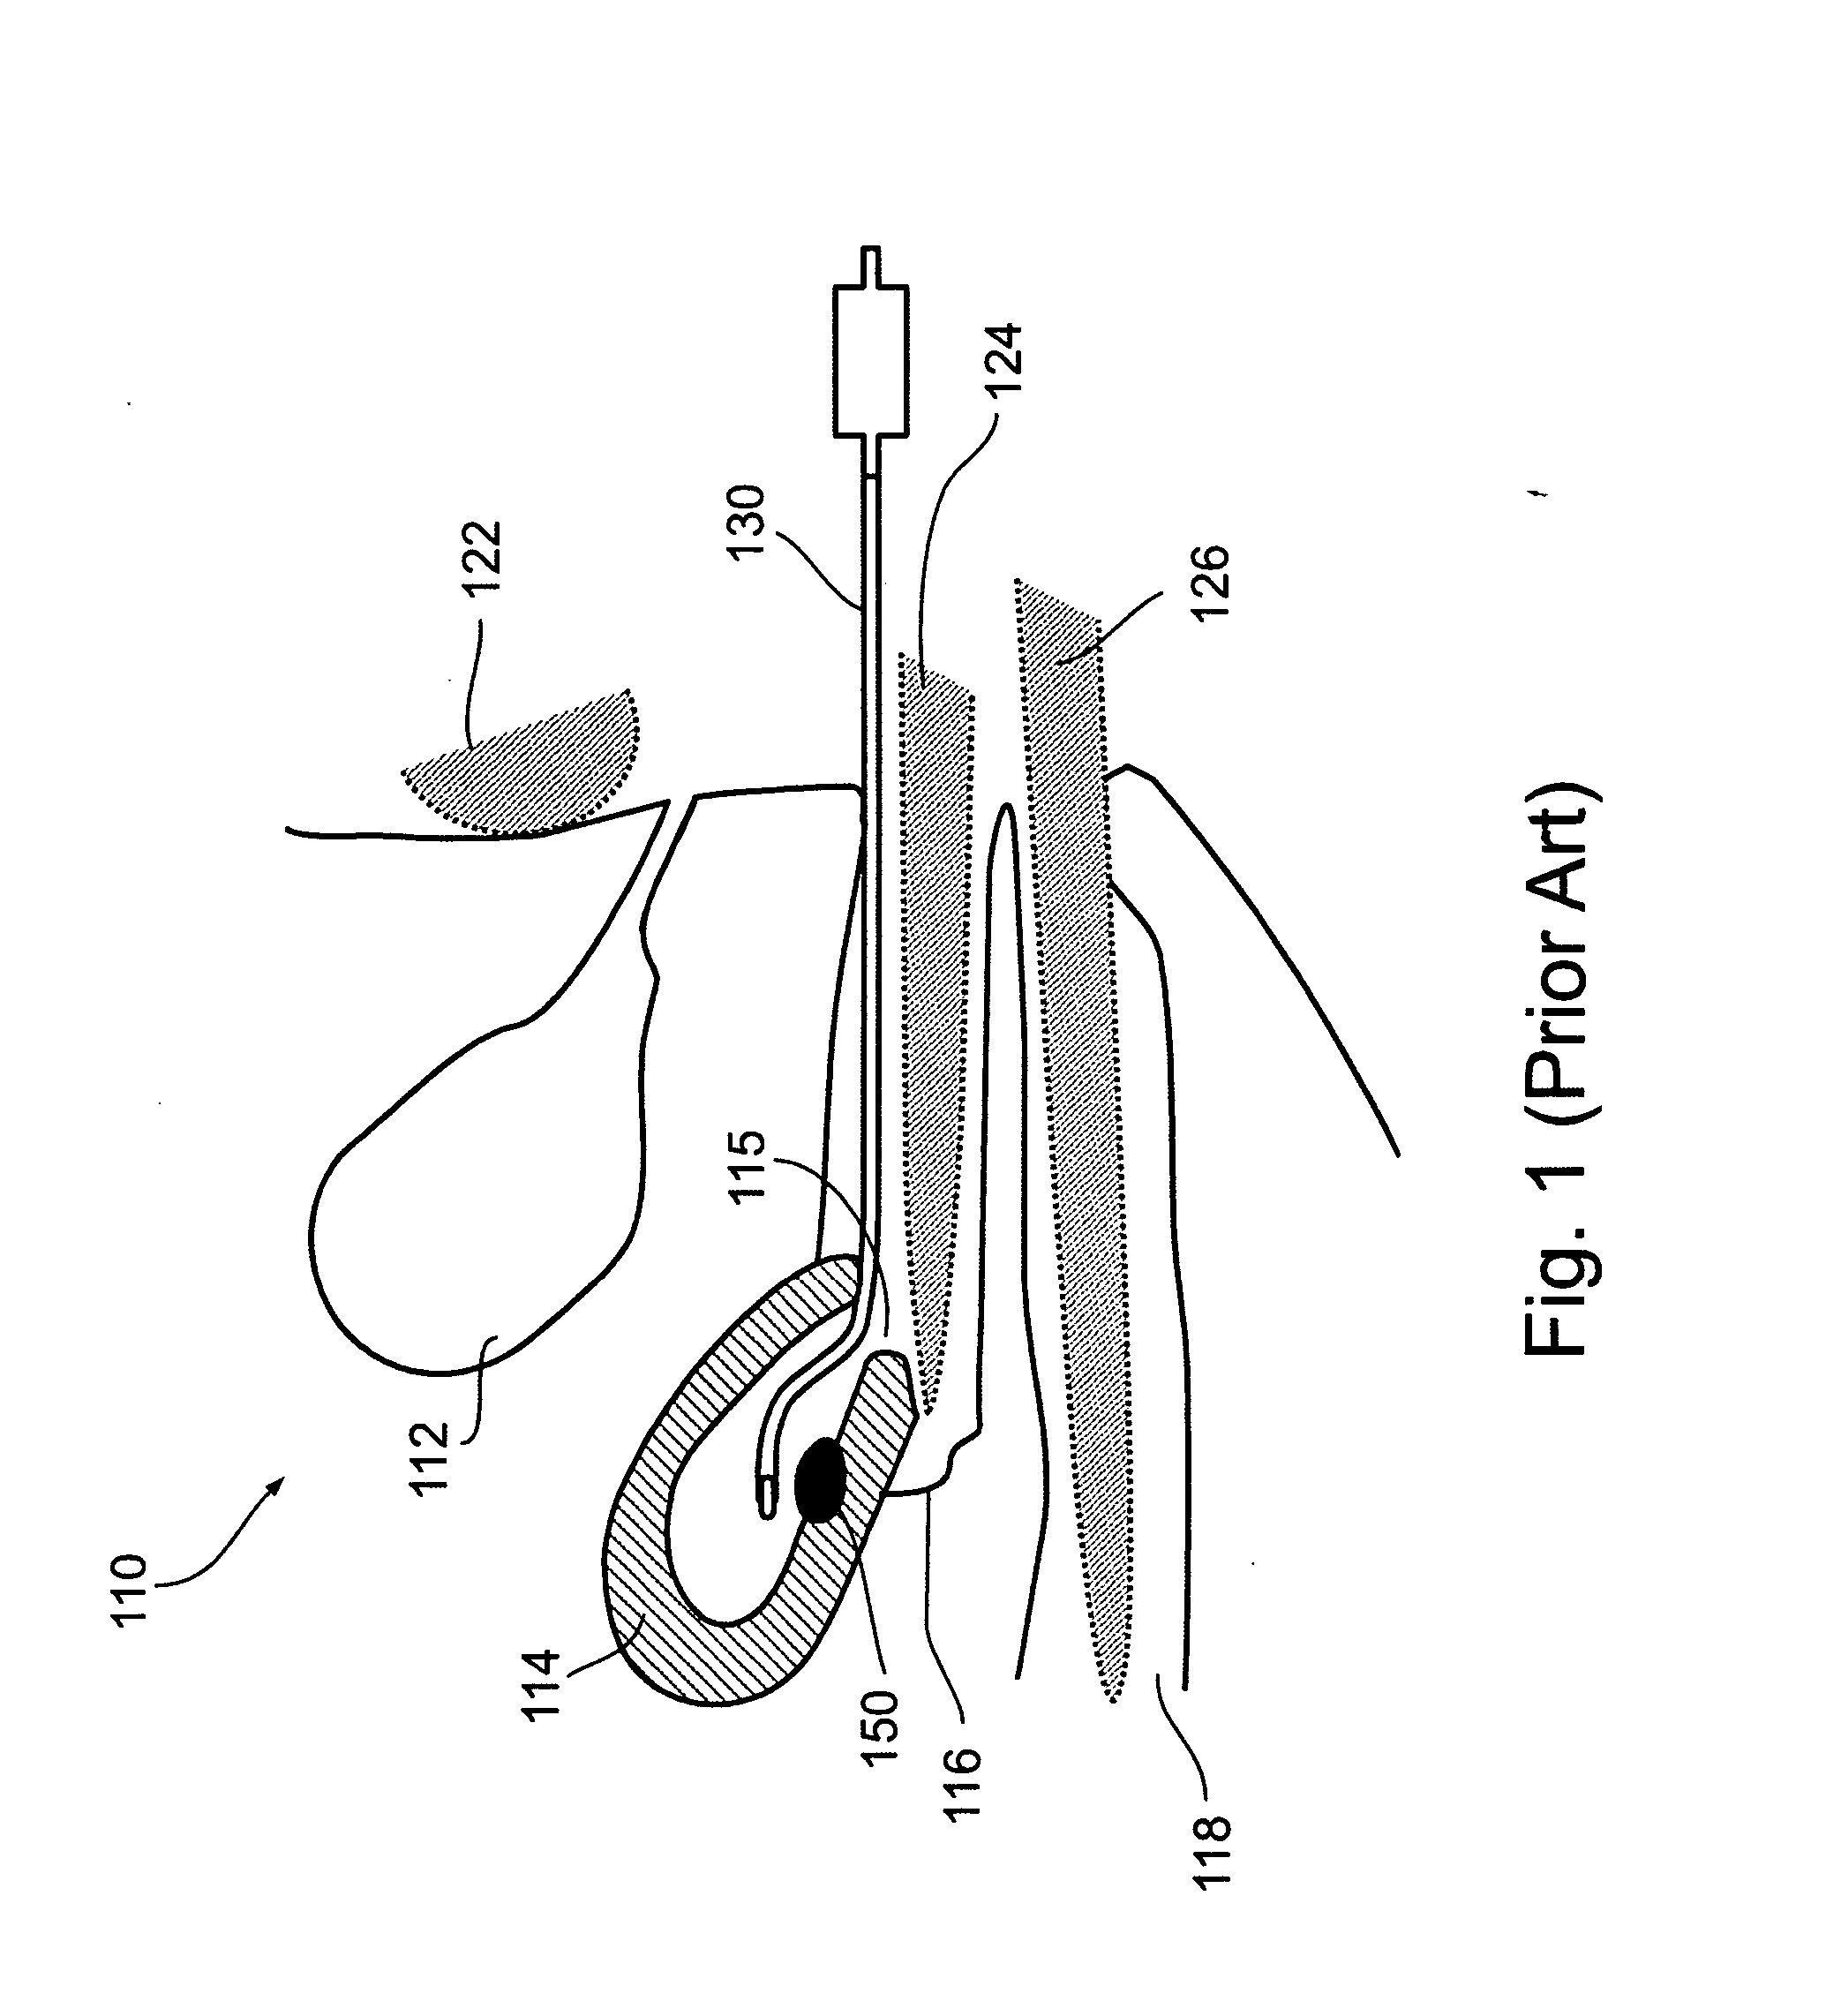 Apparatus and method for thermal ablation of uterine fibroids